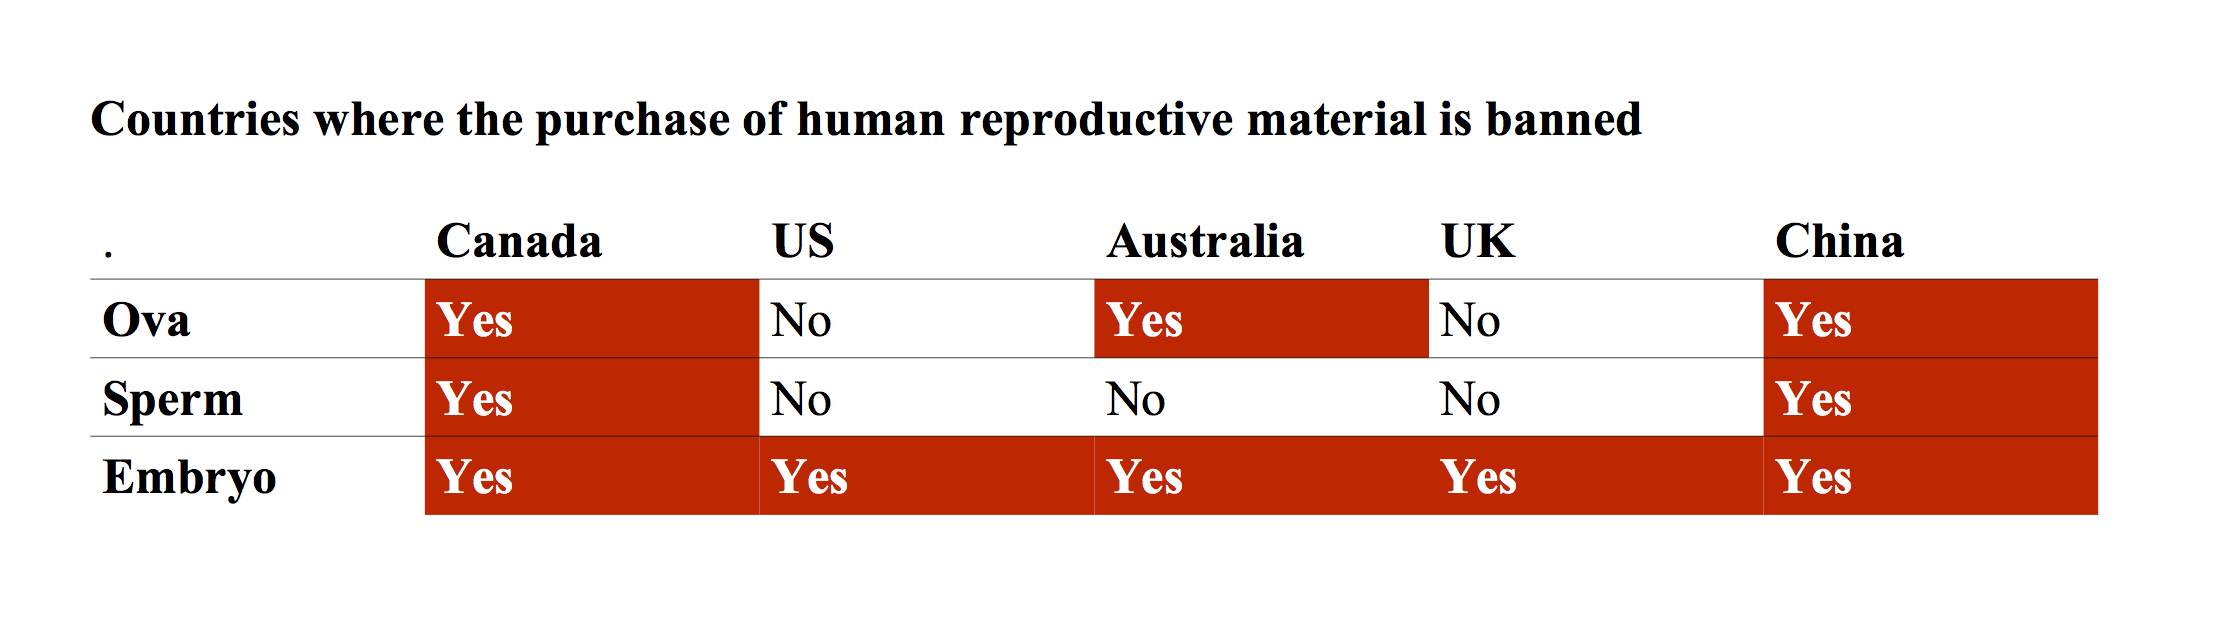 Table of bans on reproductive materials by country